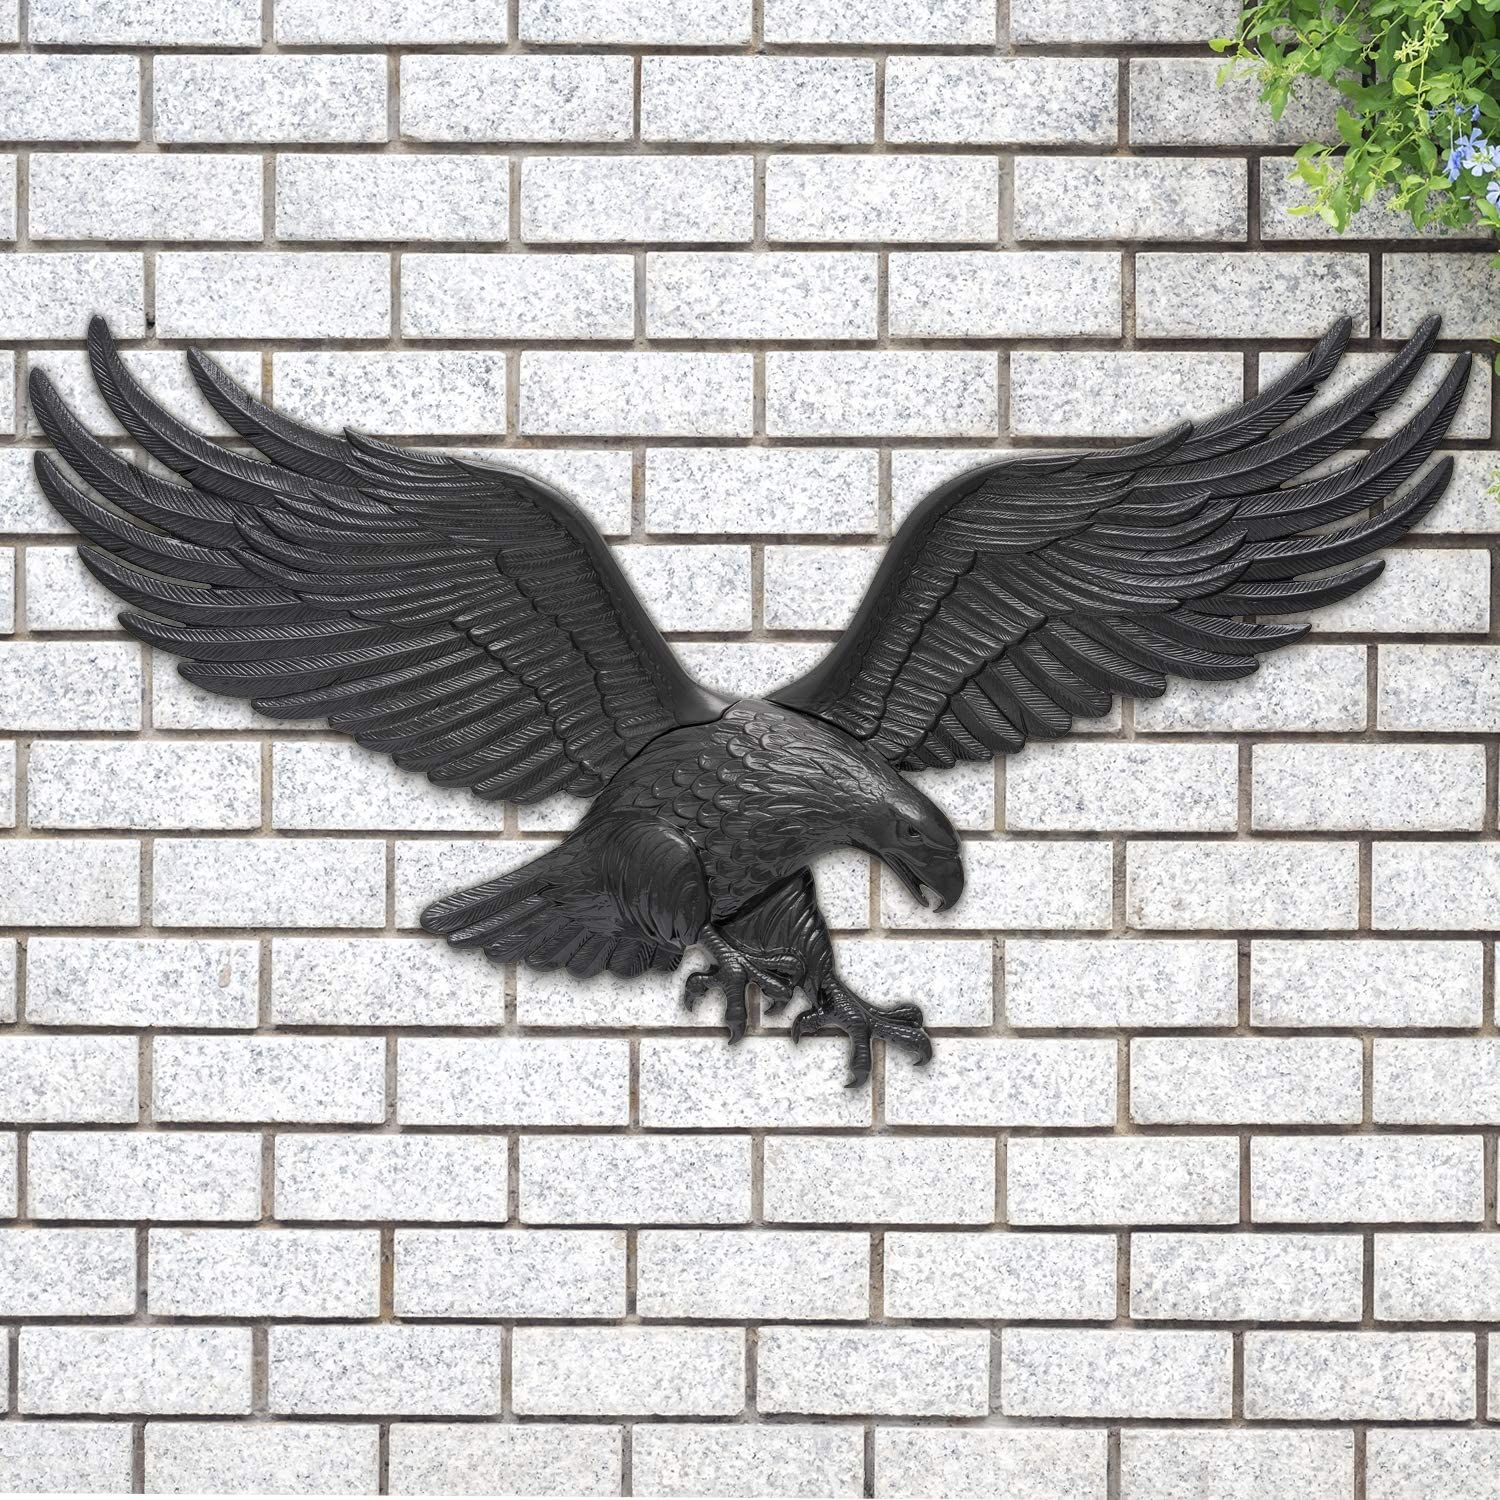 36" Eagle Wall Decor – Black Within Eagle Wall Art (View 12 of 15)